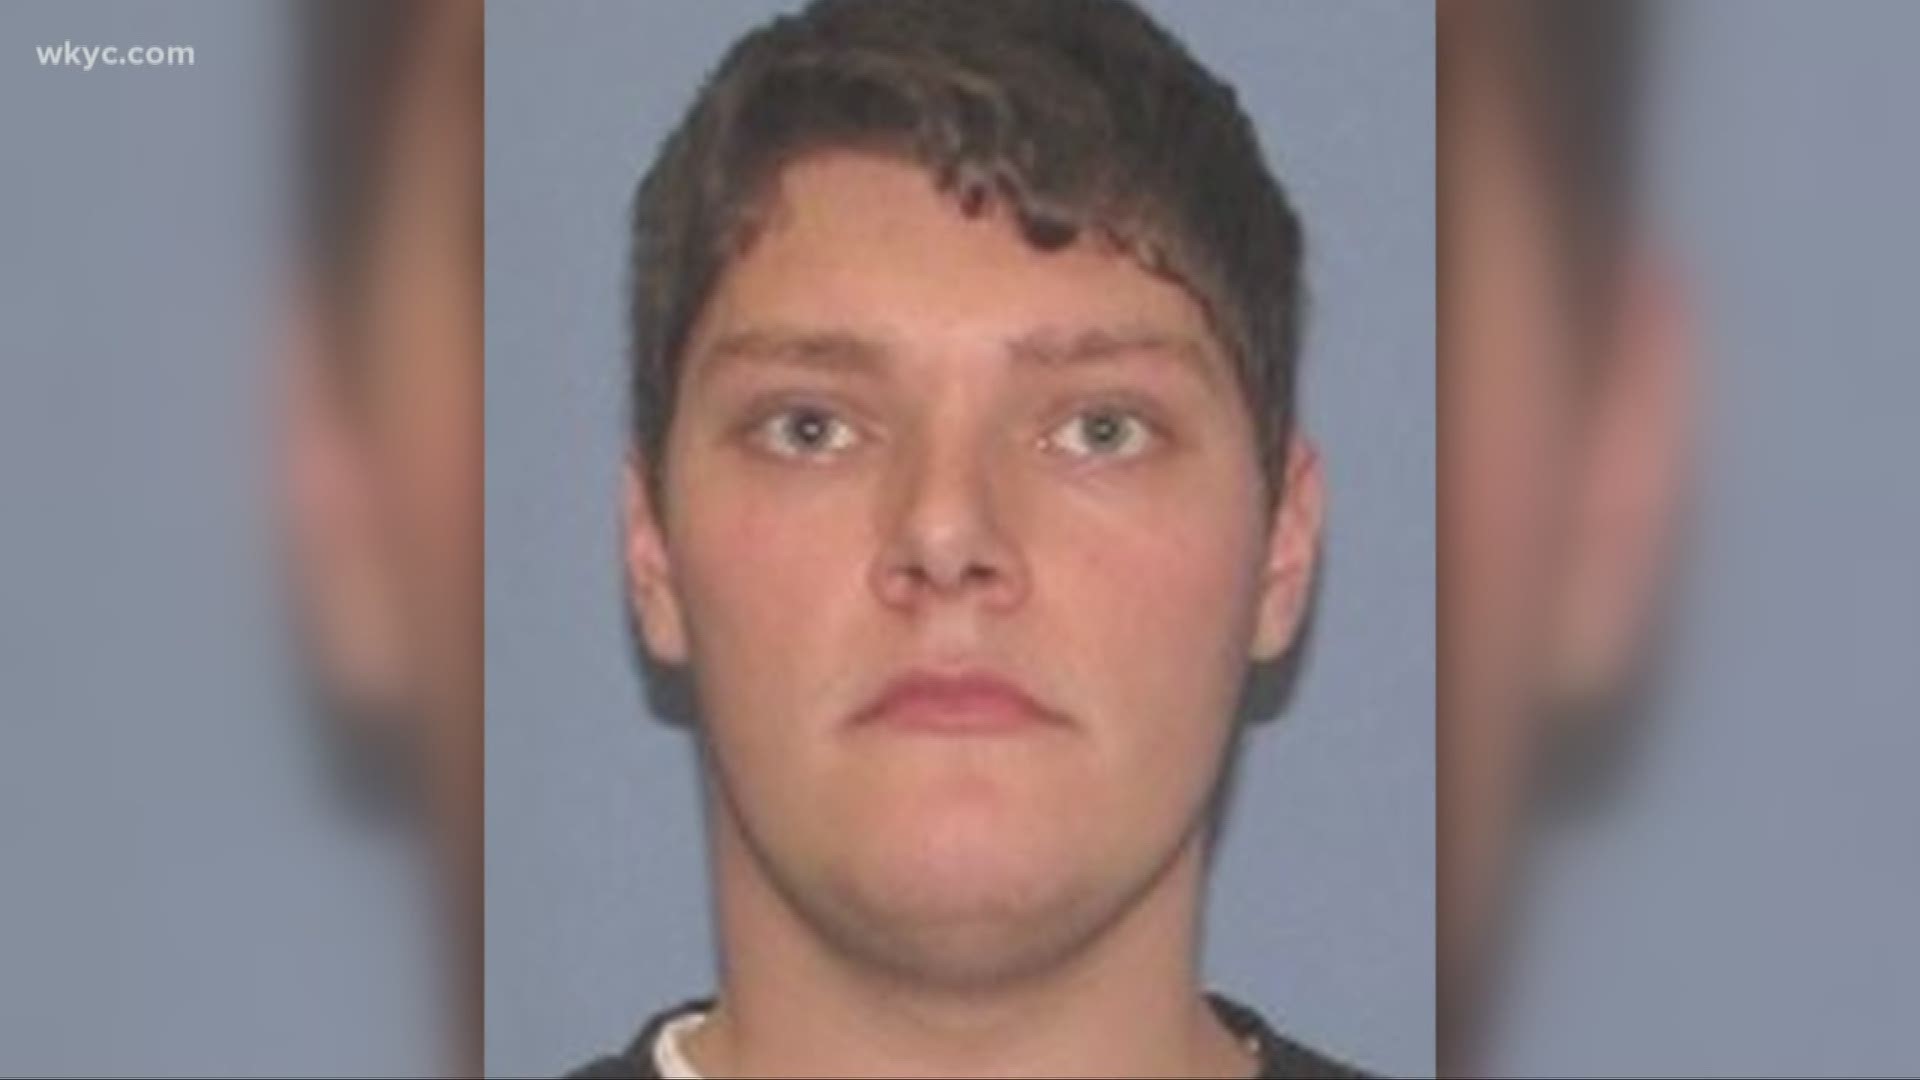 Aug. 5, 2019: He killed nine people in just 30 seconds before he was taken down by police. Authorities have identified Connor Betts of Bellbrook, Ohio, as the gunman responsible in Sunday's deadly shooting in Dayton.